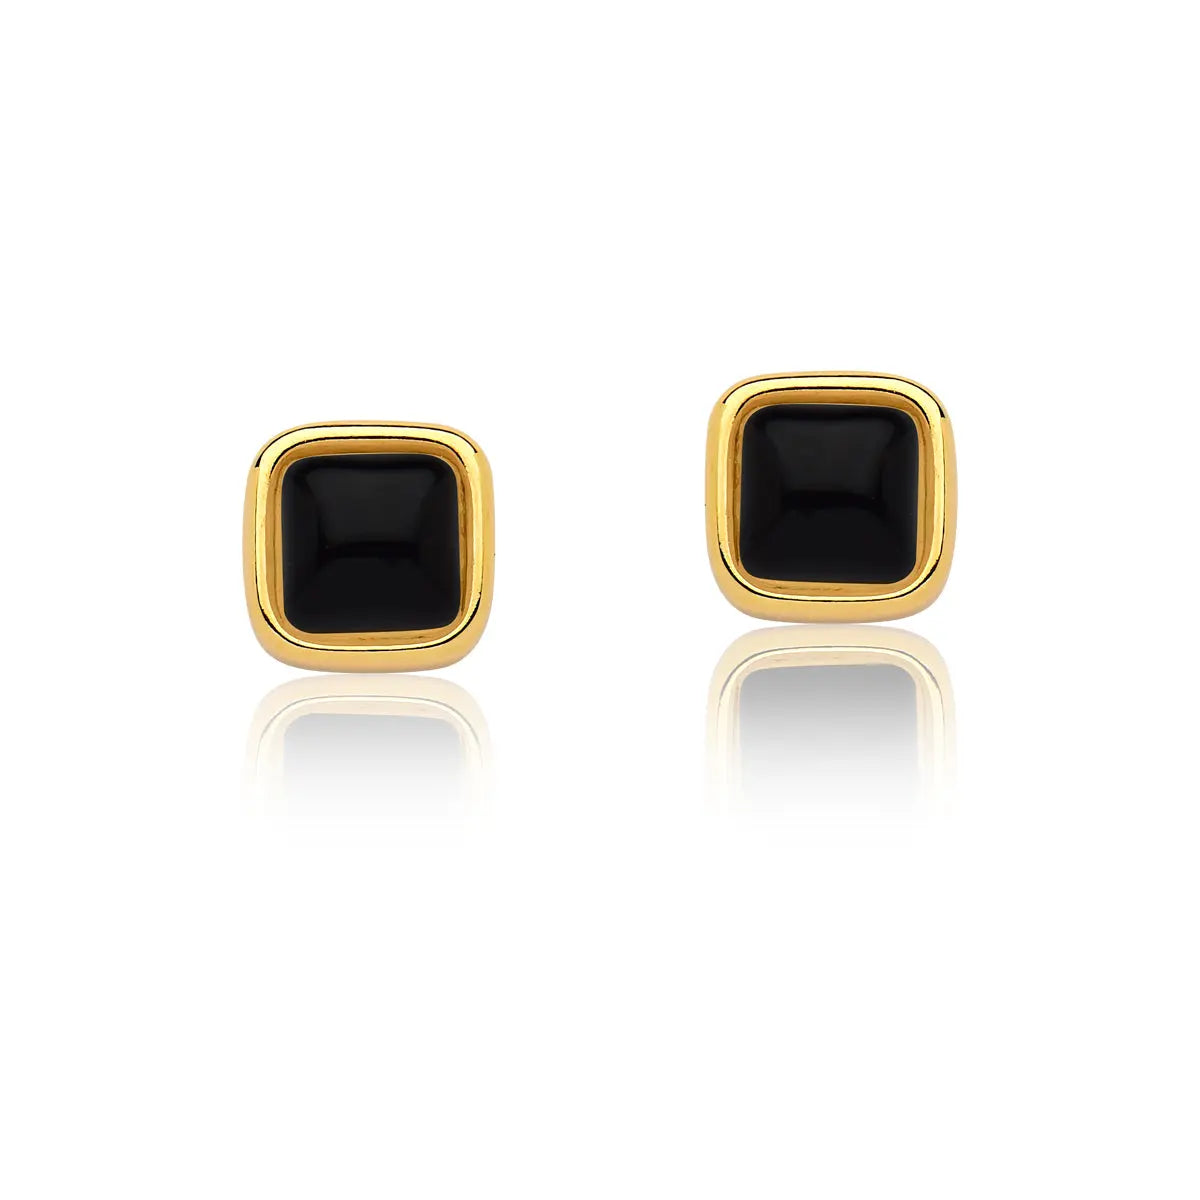 Black Agate Earrings – Gold (size small)